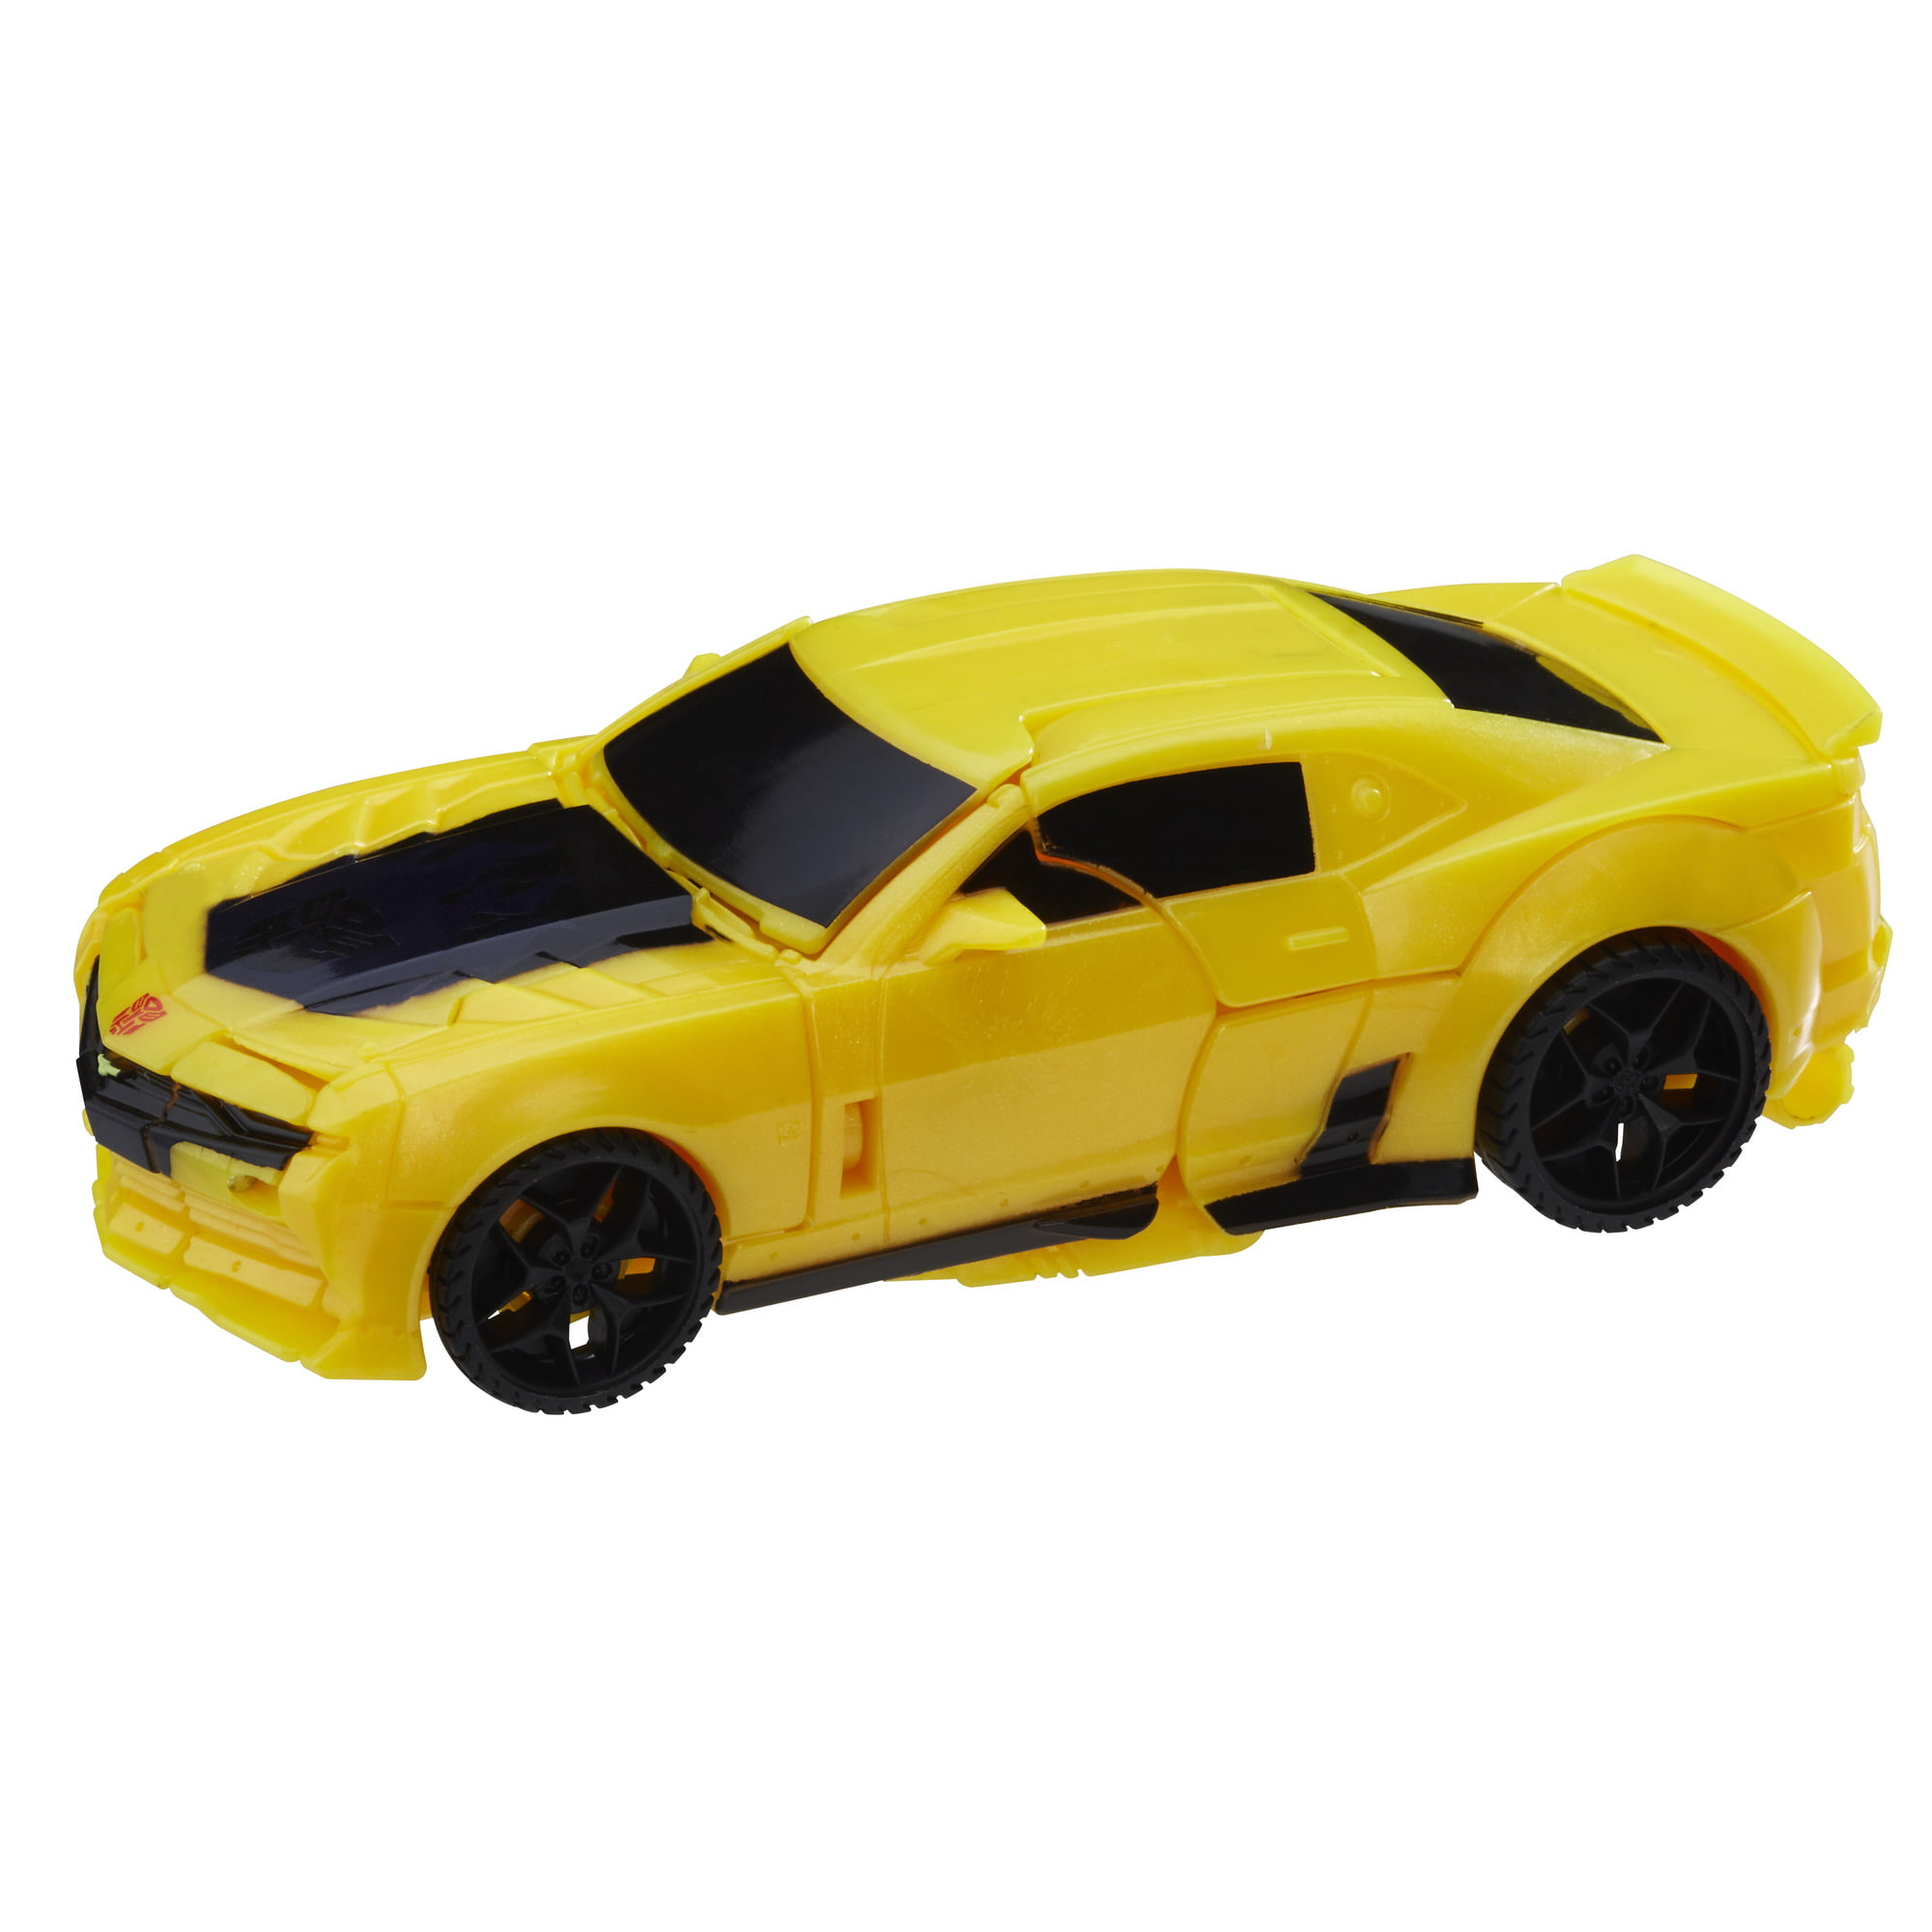 Transformers The Last Knight 1-Step Turbo Changer Bumblebee 